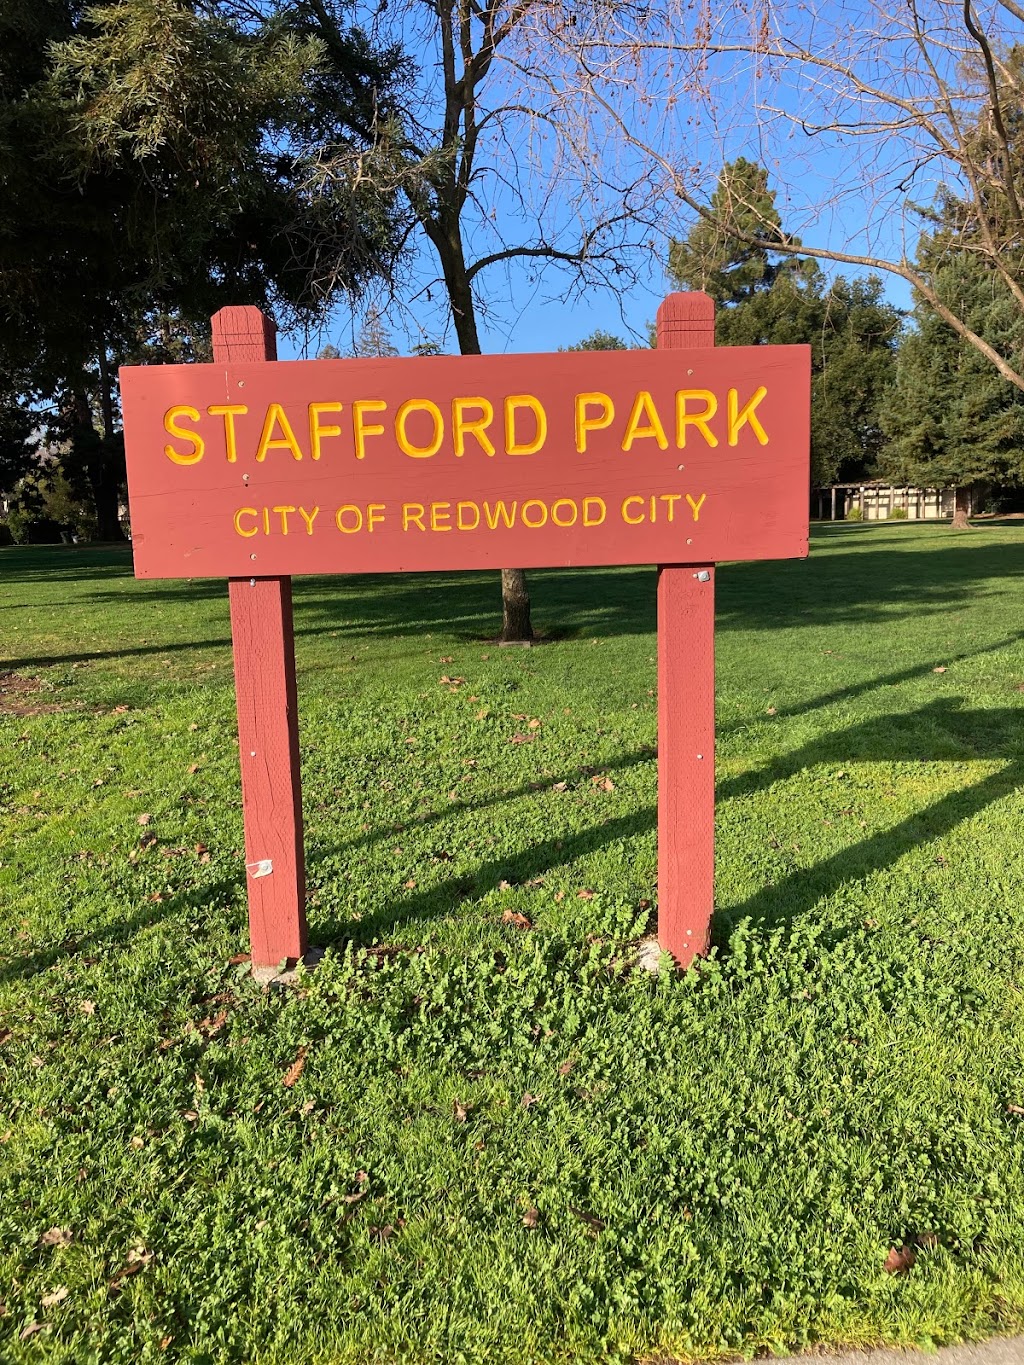 Stafford Park | 2100 Hopkins Avenue and, King St, Redwood City, CA 94062 | Phone: (650) 780-7250